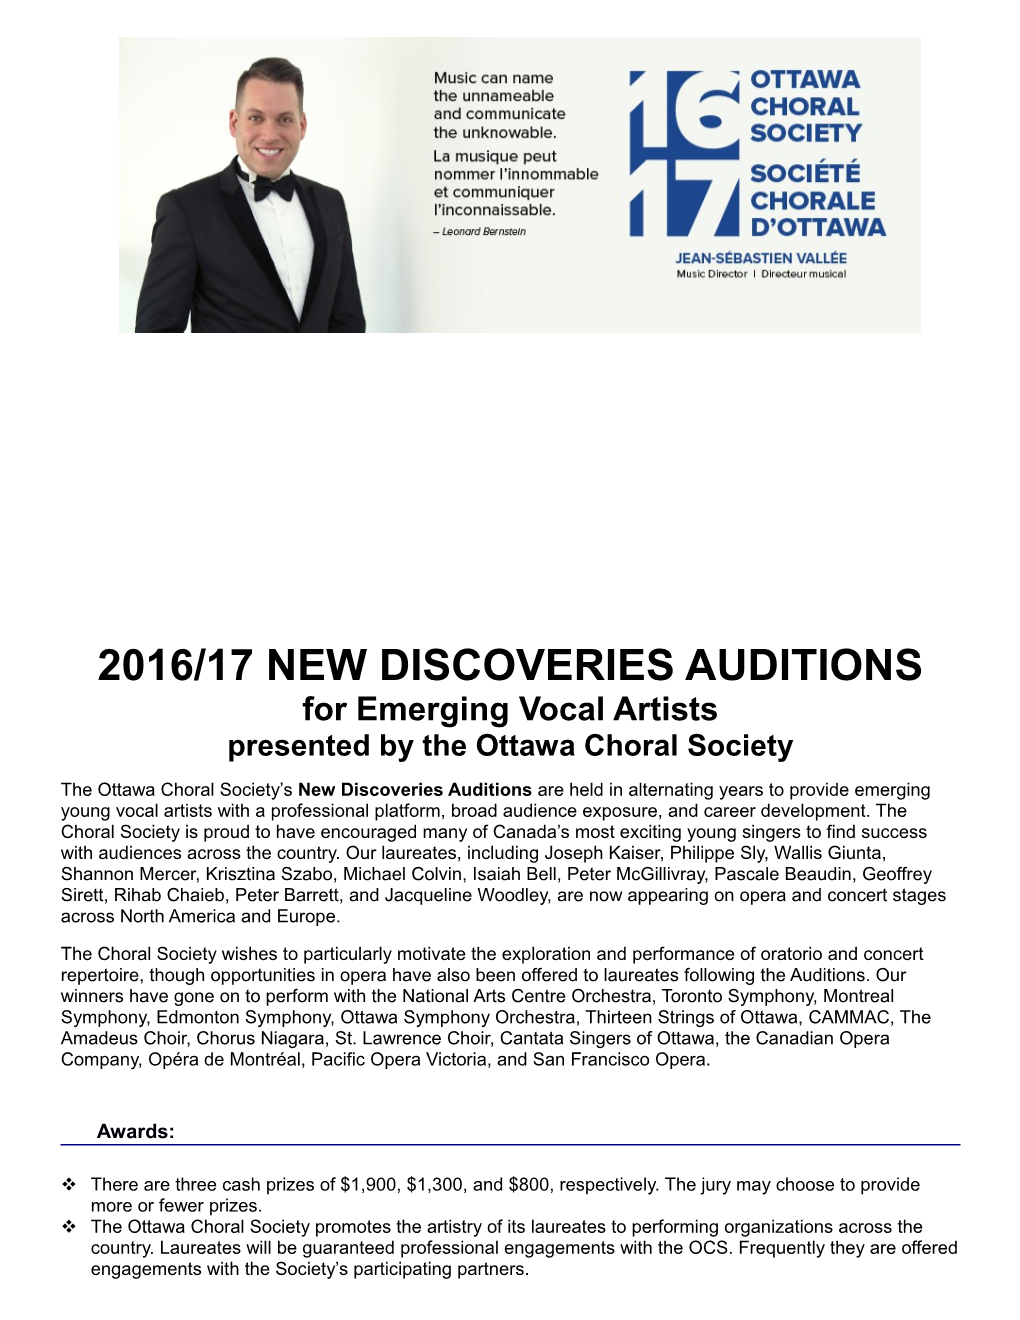 2016/17 NEW DISCOVERIES AUDITIONS for Emerging Vocal Artists Presented by the Ottawa Choral